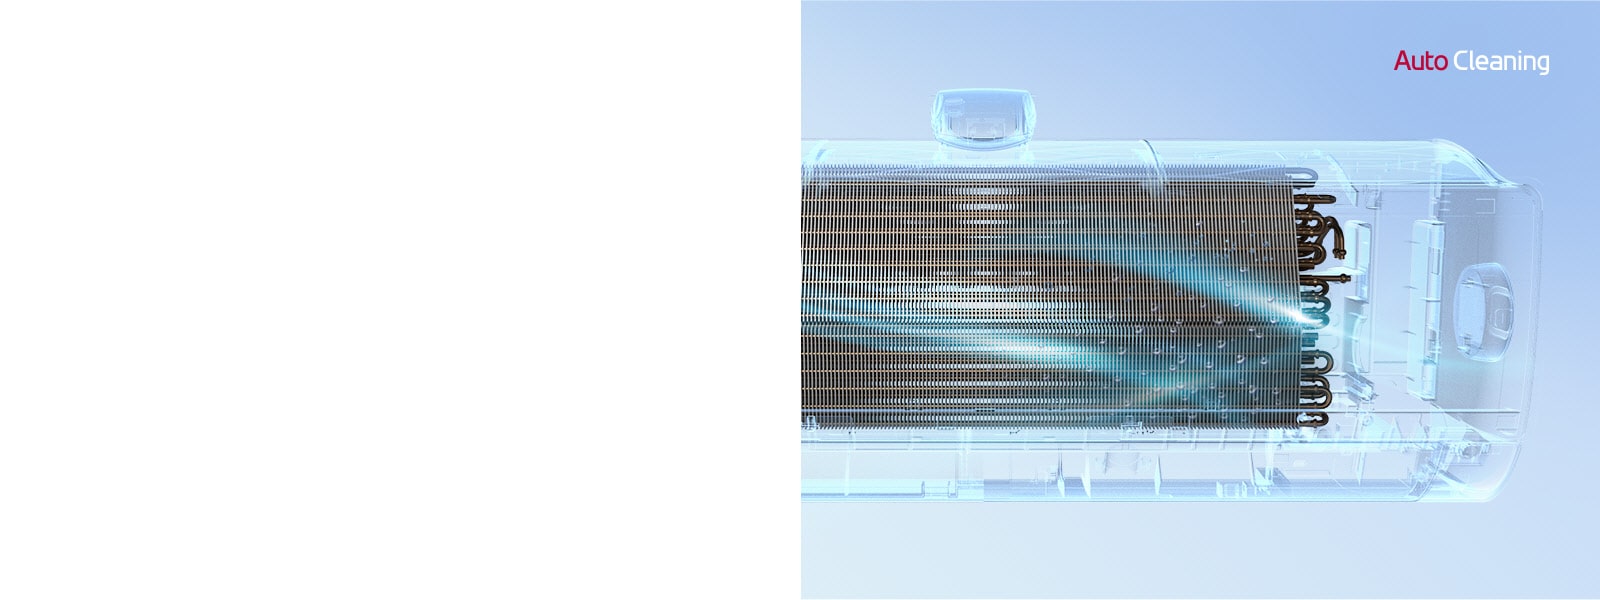 The front of the LG air conditioner with its outer part completely invisible, so that the inner workings of the machine can be seen. The machine runs and then a blue light, the auto-cleaning mechanism activates and cleans the machine with a blue light. The AutoCleaning logo is in the upper right corner.